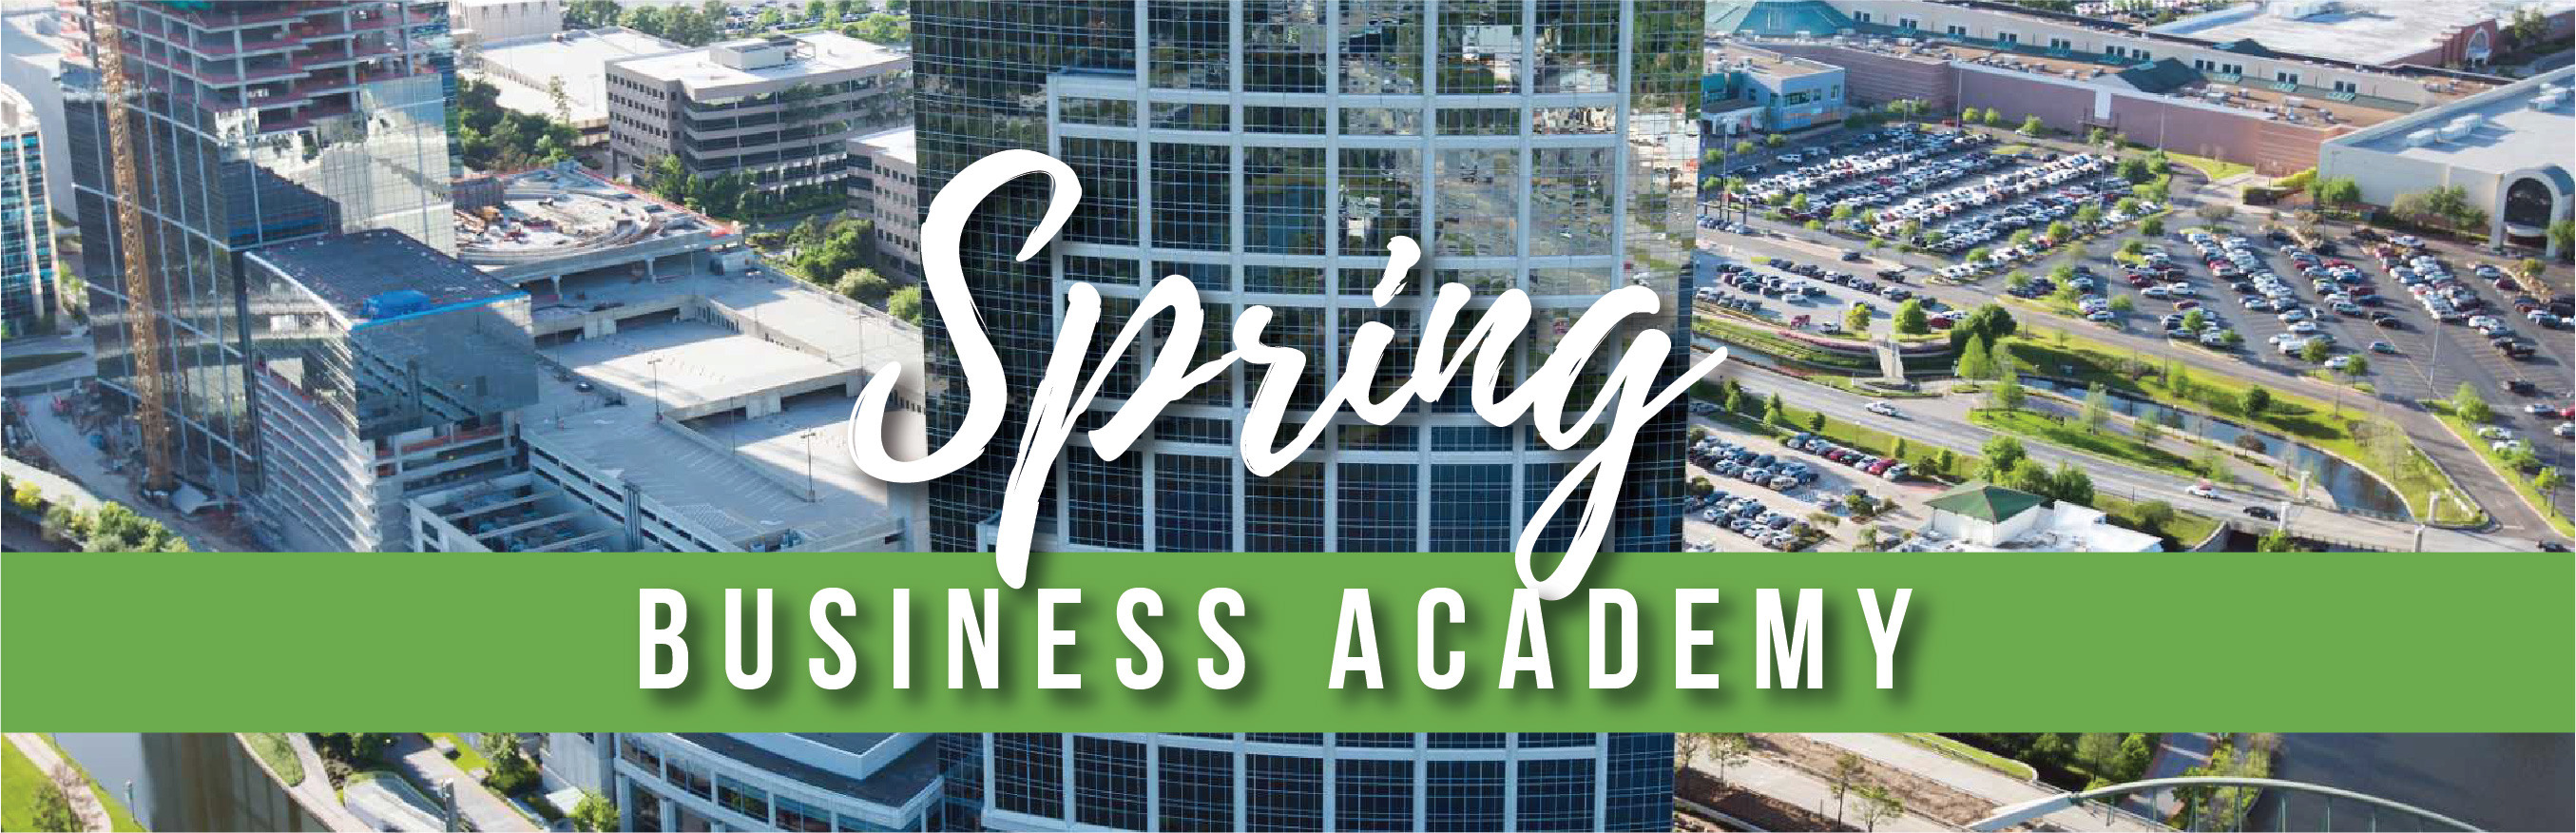 2019 Vision Trends Spring Business Academy